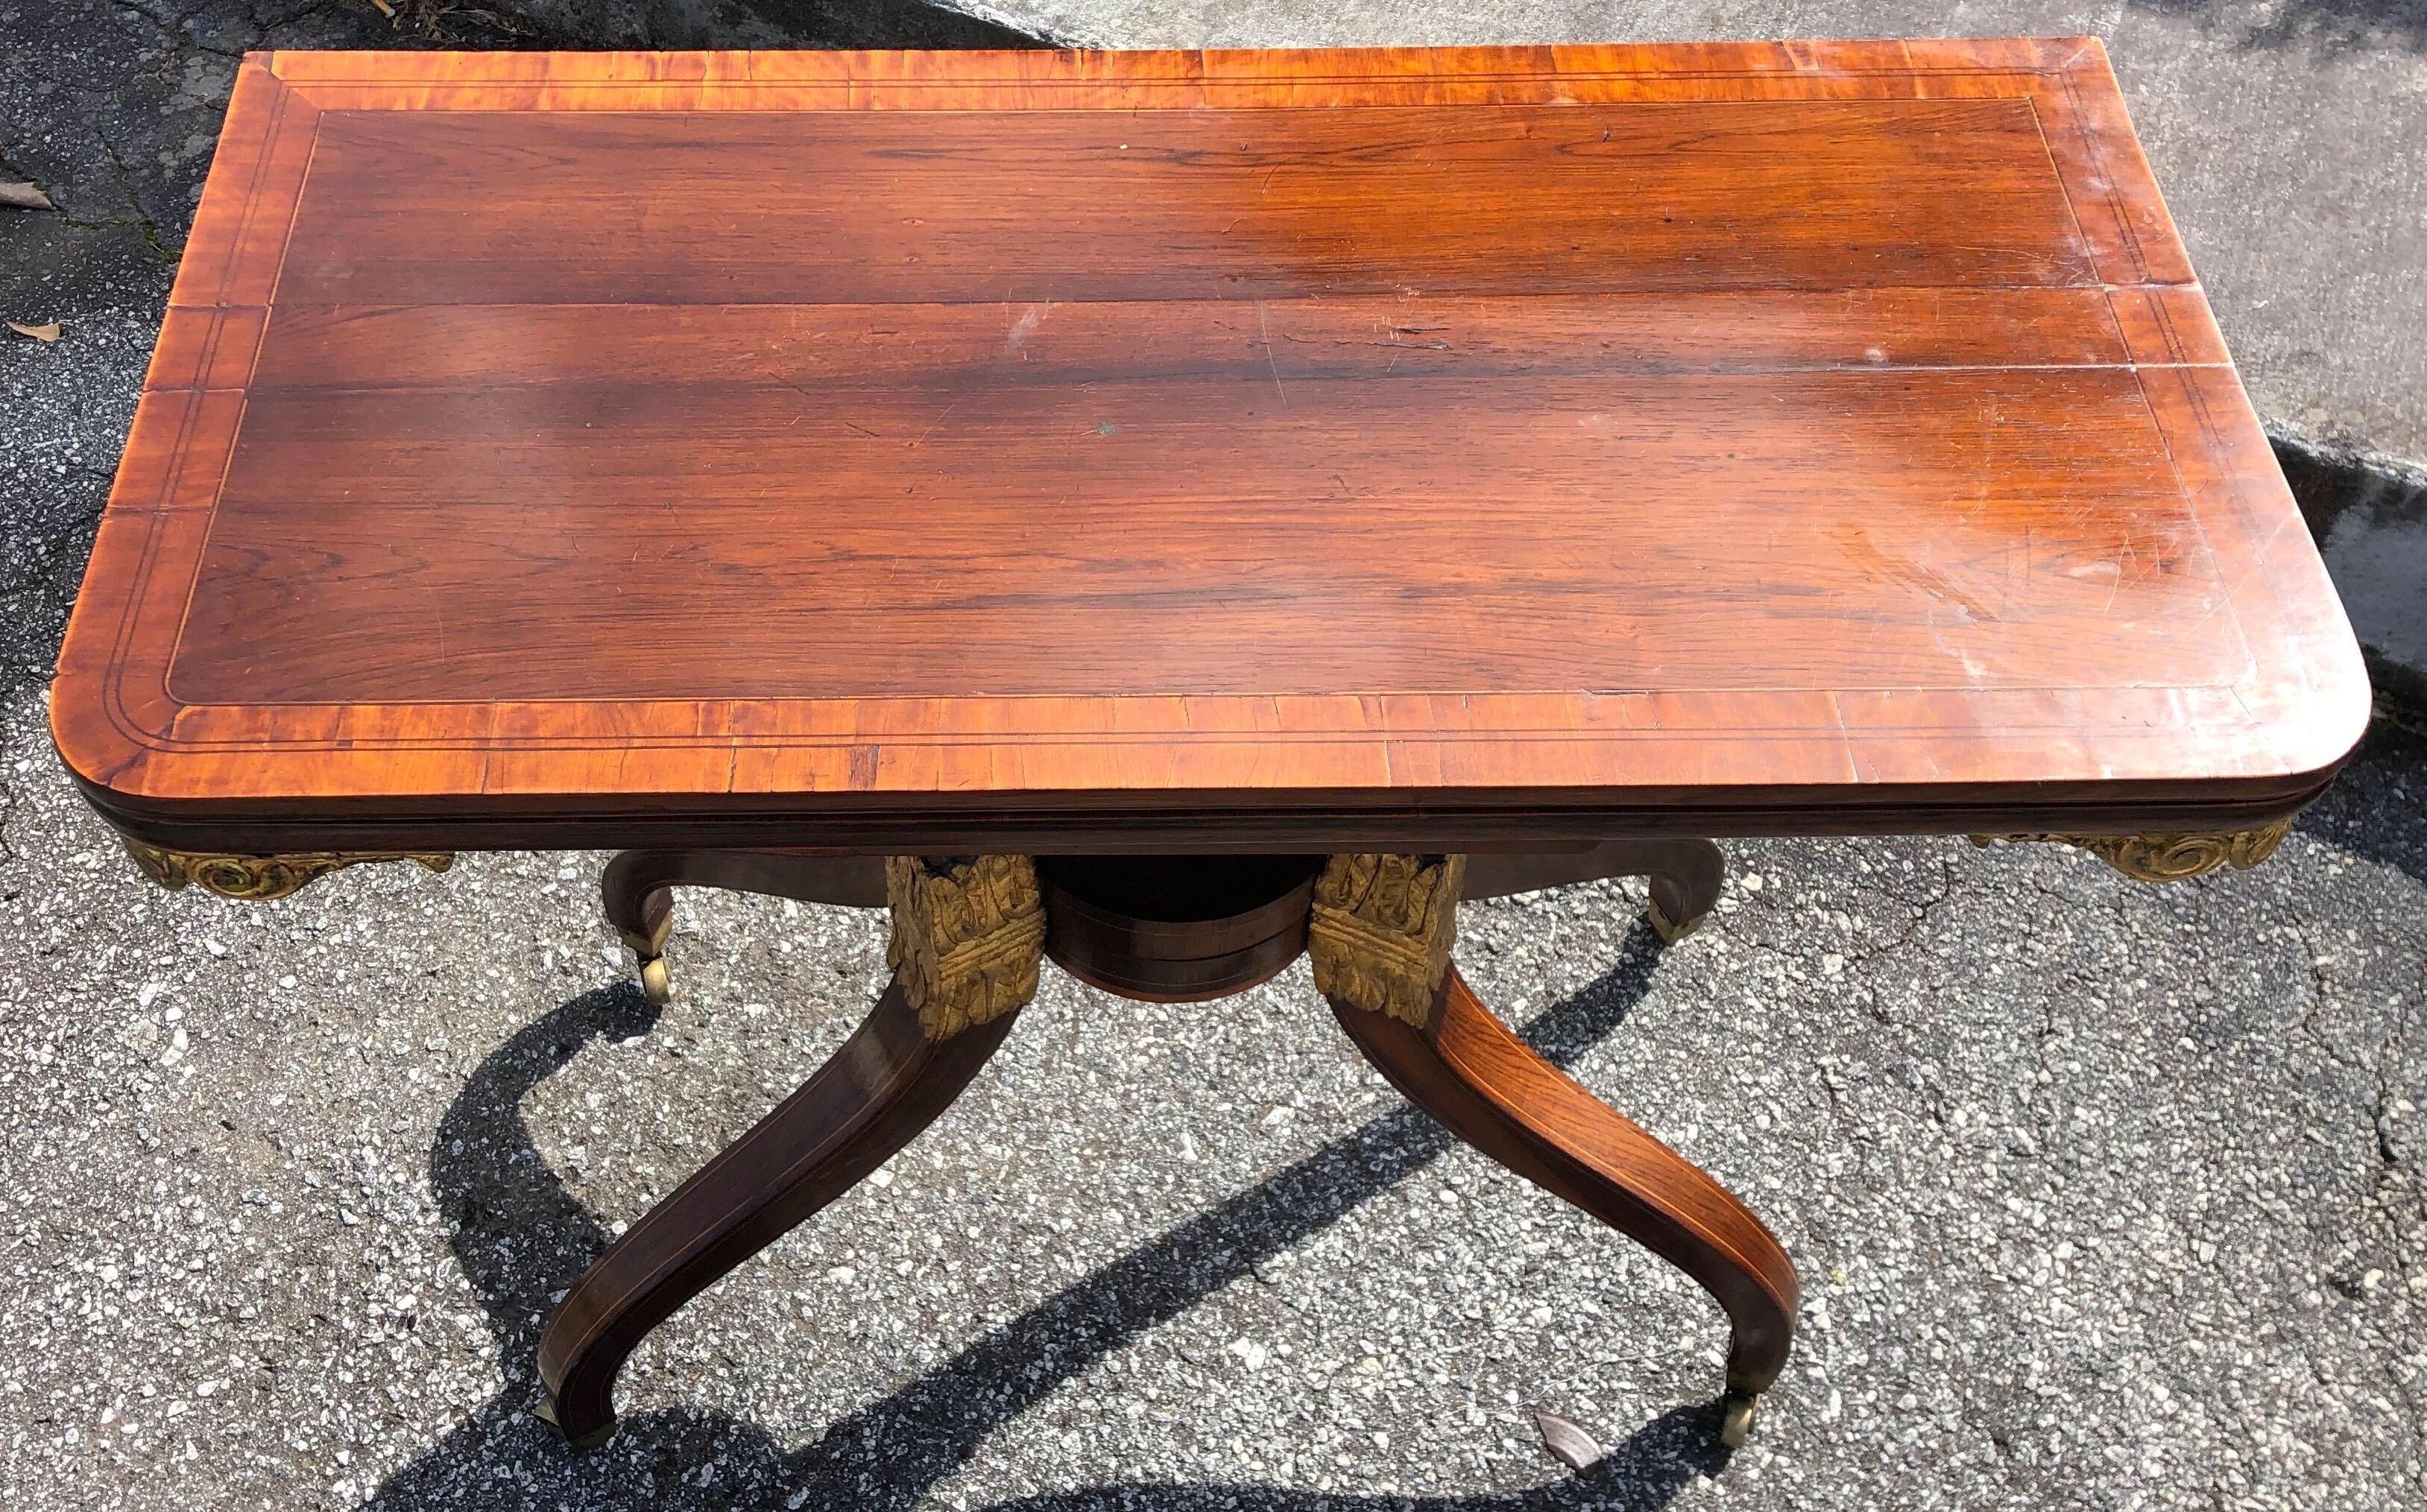 Superb quality Regency rosewood Georgian card table. Rare design with a Wilkinson patent action opening mechanism. The back two inverted sabre legs open up in a scissor like fashion from the central circular boss where the other two legs meet.